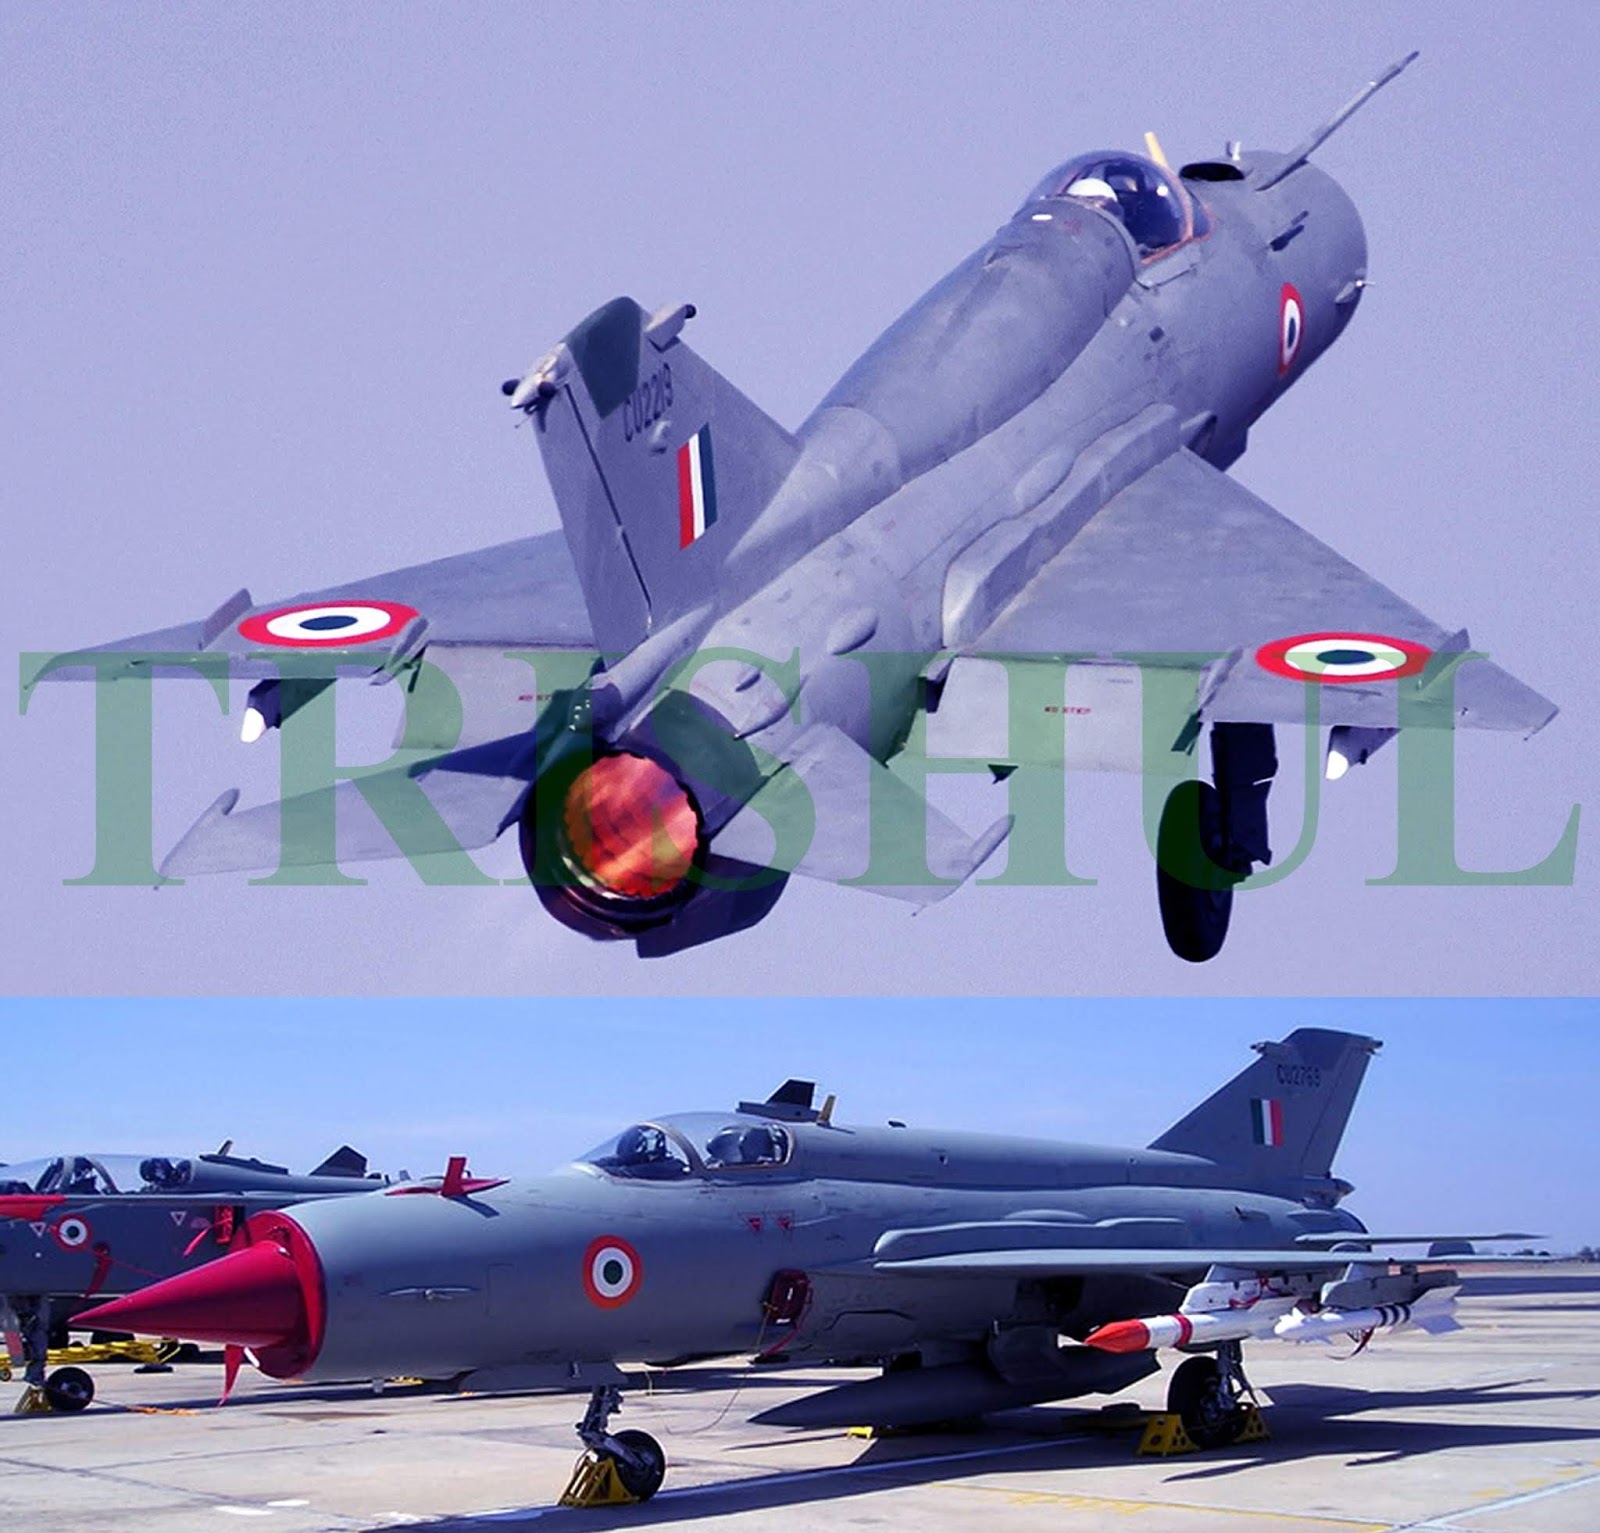 TRISHUL: Airpower Application In Sub-Conventional Warfare: Decoding The  IAF's February 26 Non-Military Pre-Emptive Air-Strike & February 27 Air  Combat Over J & K/PoK